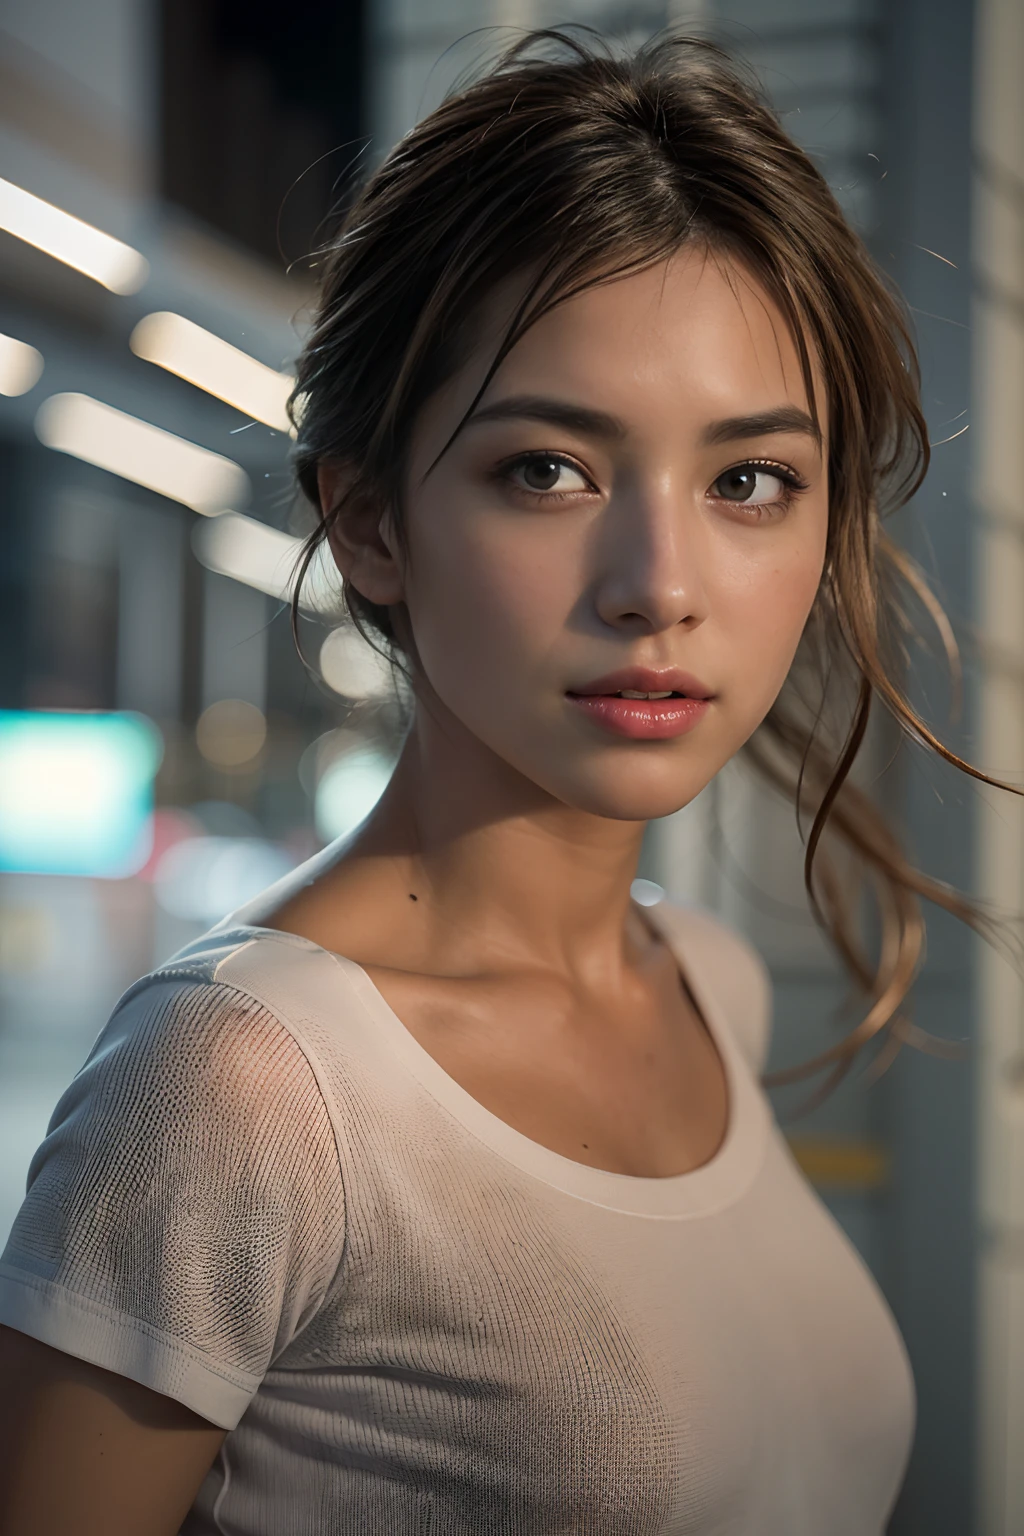 Photorealsitic, hyper realisitic, realisitic, Smooth lighting, Improved lighting quality in movies, 8K, ((1girl in)), 20 years girl, Realistic lighting, Back lighting, Facial light, raytrace, brightened light, Top quality real texture skins, Close-up from chest up, tshirts, Increase the beauty of skin texture